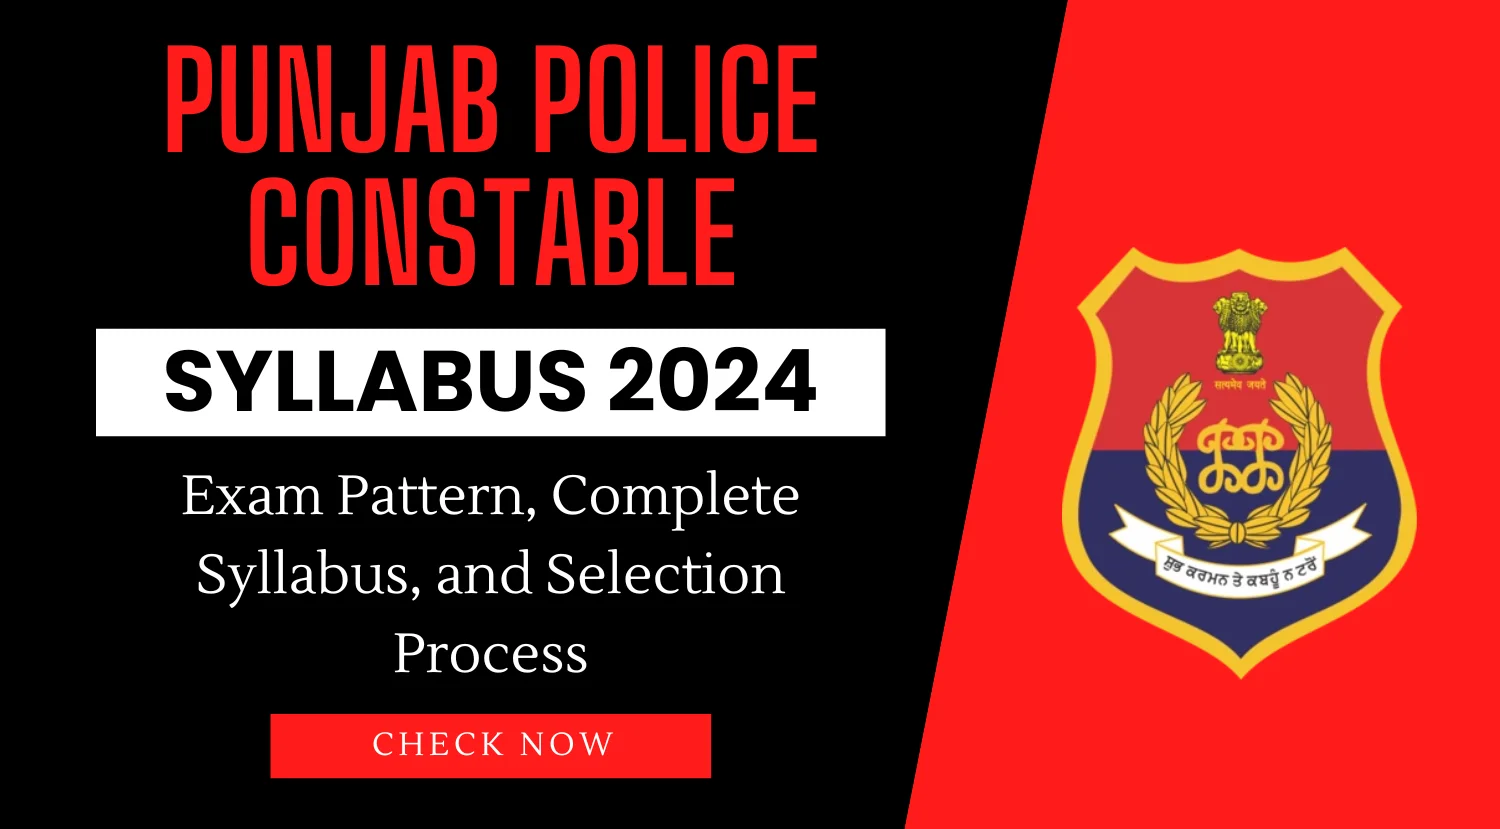 Punjab Police Constable Syllabus 2024 Detailed Exam Pattern Complete Syllabus and Selection Process